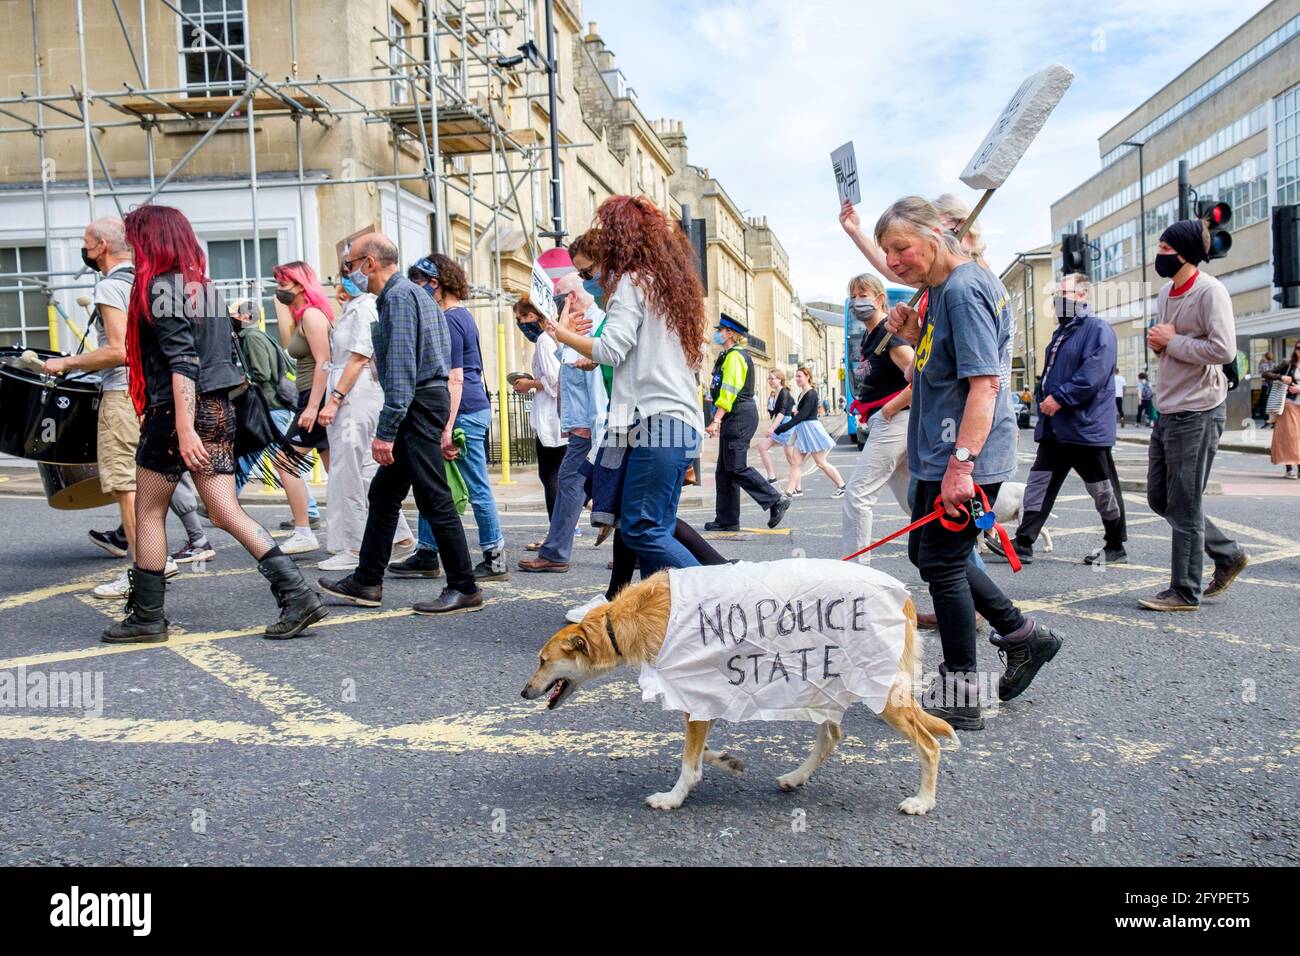 Bath, Somerset, UK. 29th May, 2021. Kill the bill protesters carrying anti government placards and signs are pictured as they take part in a kill the bill protest march through the centre of Bath. The protesters took to the streets to demonstrate about the police, crime, sentencing and courts bill which the UK government wants to bring into force.The bill includes major government proposals on crime and justice in England and Wales.  Credit: Lynchpics/Alamy Live News Stock Photo